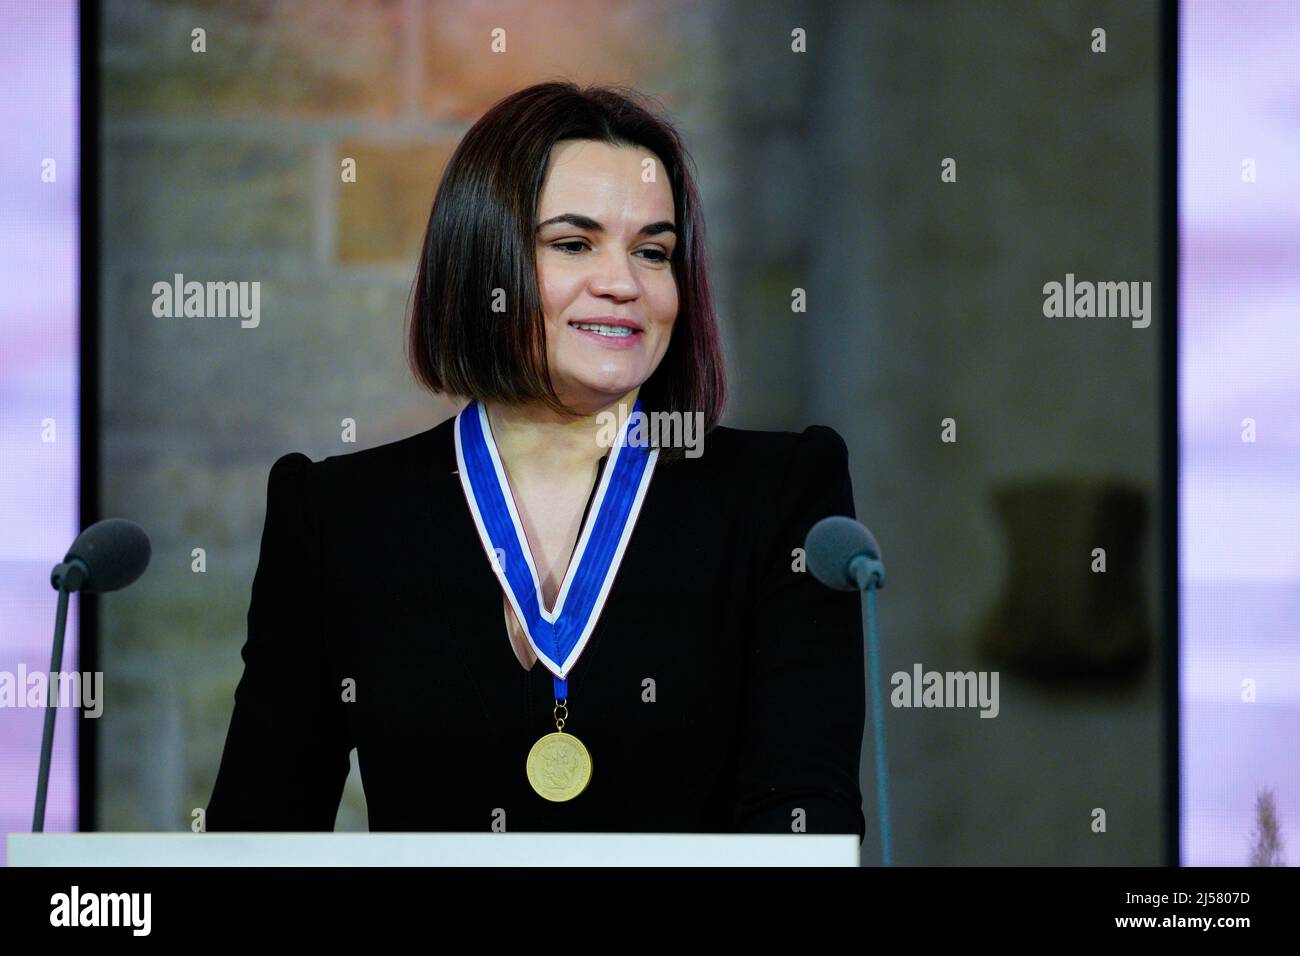 2022-04-21 12:05:07 MIDDELBURG - Sviatlana Tsikhanouskaya, leader of the  democratic movement in Belarus, with the International Four Freedoms Award  just presented to her. The Four Freedoms Awards are presented each year to